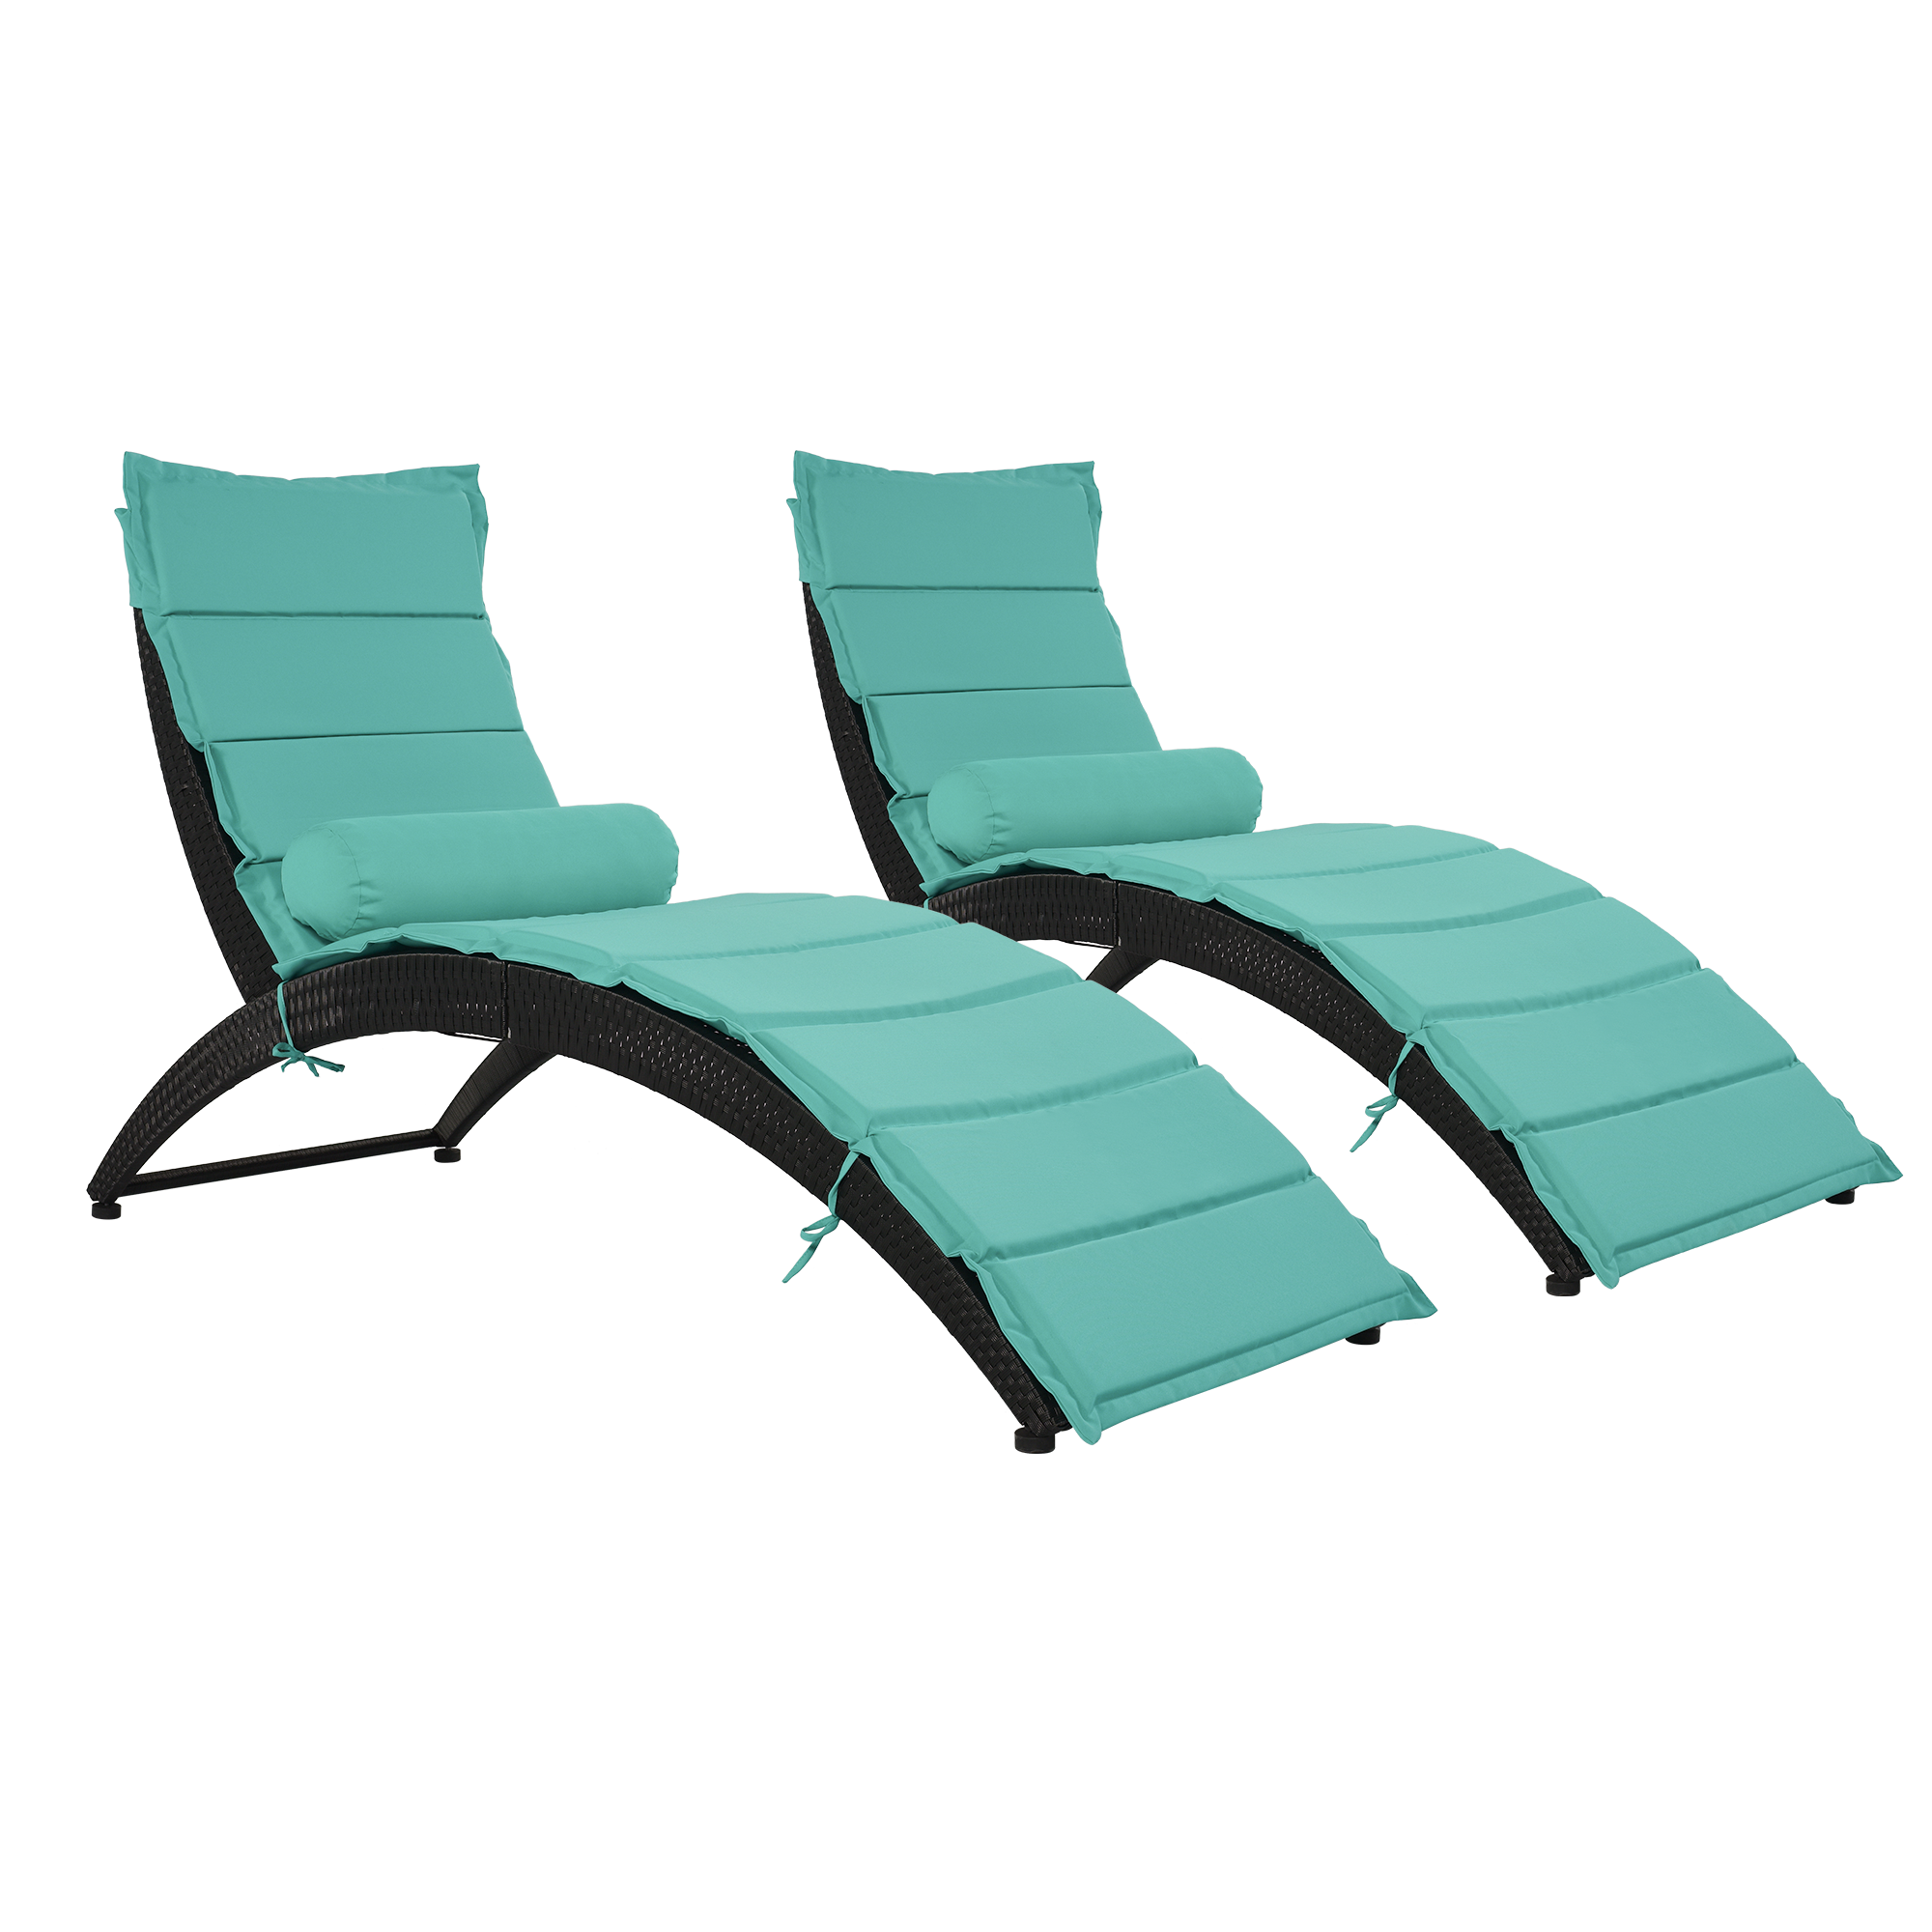 Sesslife Lounge Chairs for Outdoor Outside Lounge Chairs Set of 2, Adjustable PE Rattan Wicker Patio Pool Lounge Chair with Cushion and Cup Table, for Poolside Backyard Deck Porch Garden, Beige - image 3 of 10